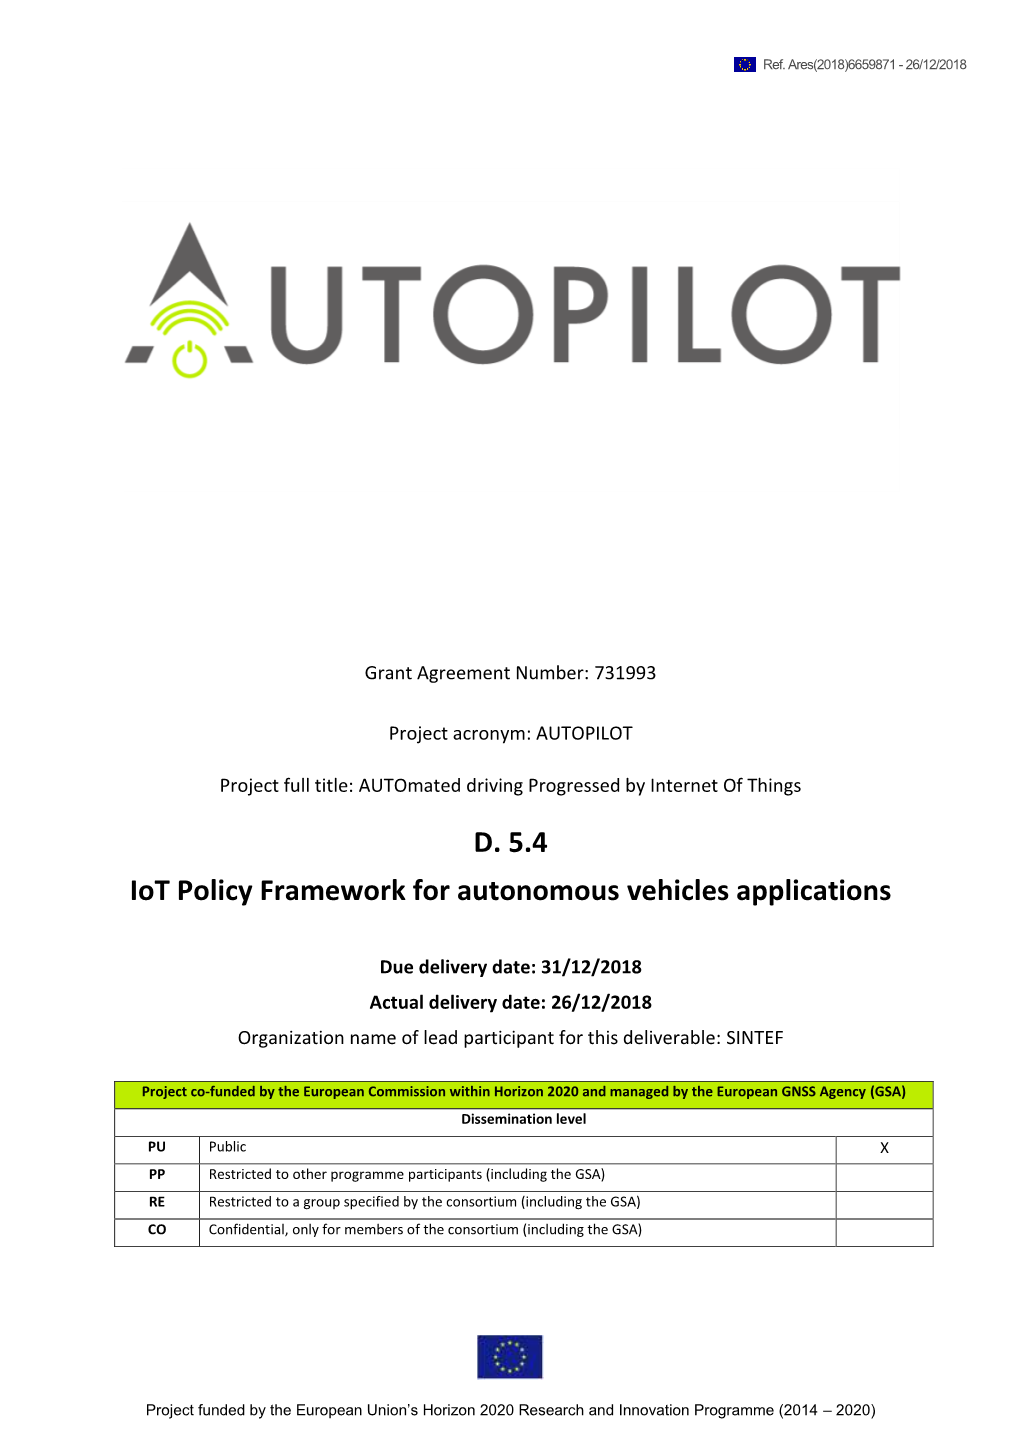 D. 5.4 Iot Policy Framework for Autonomous Vehicles Applications